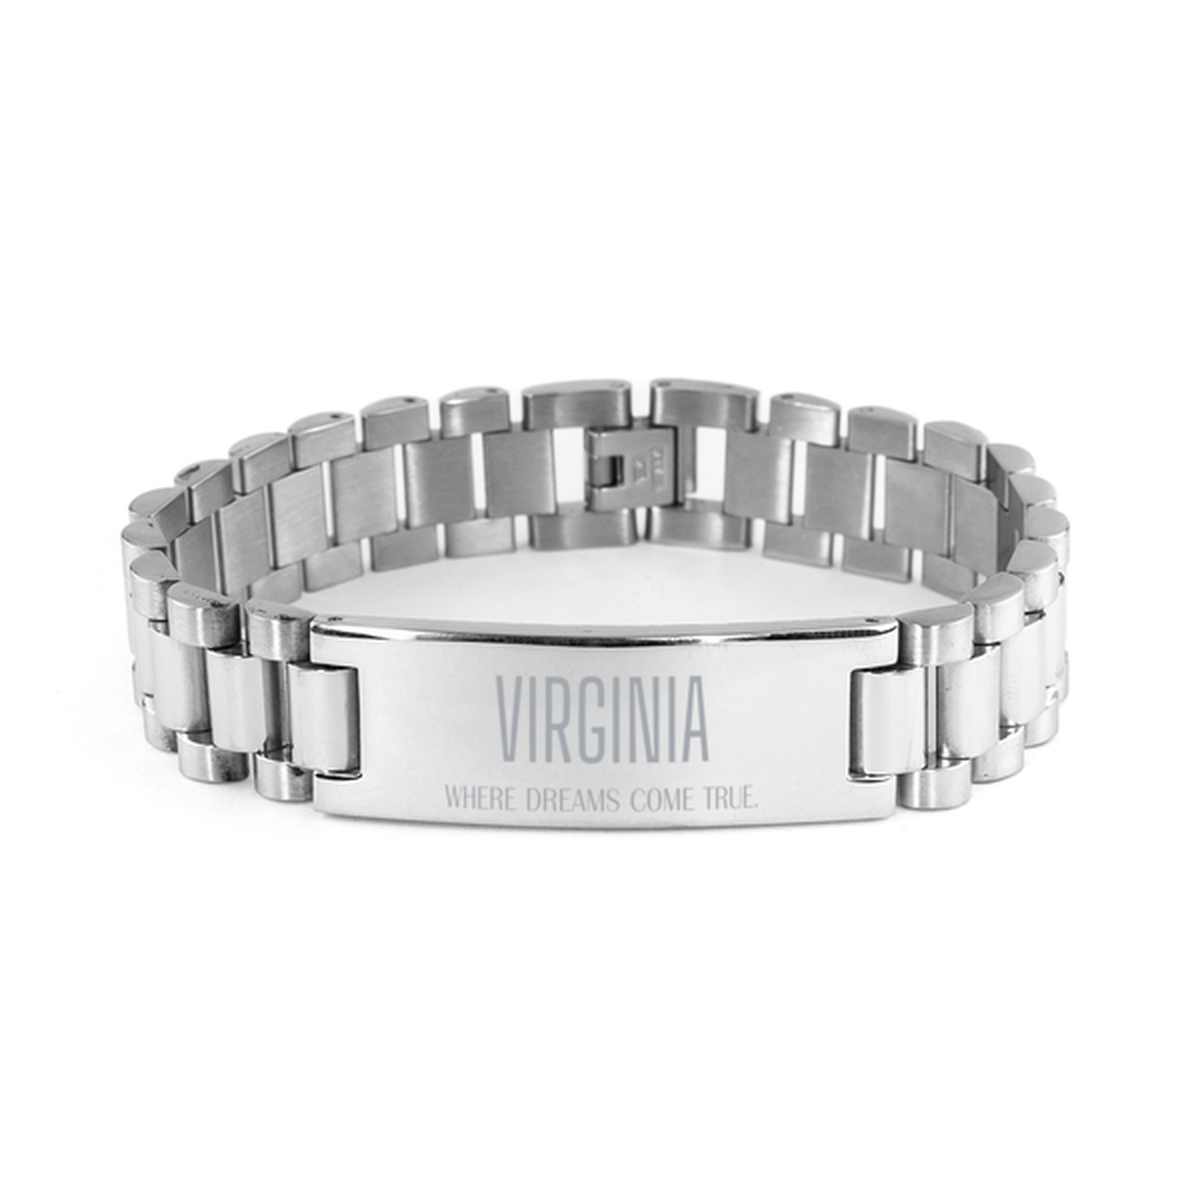 Love Virginia State Ladder Stainless Steel Bracelet, Virginia Where dreams come true, Birthday Inspirational Gifts For Virginia Men, Women, Friends